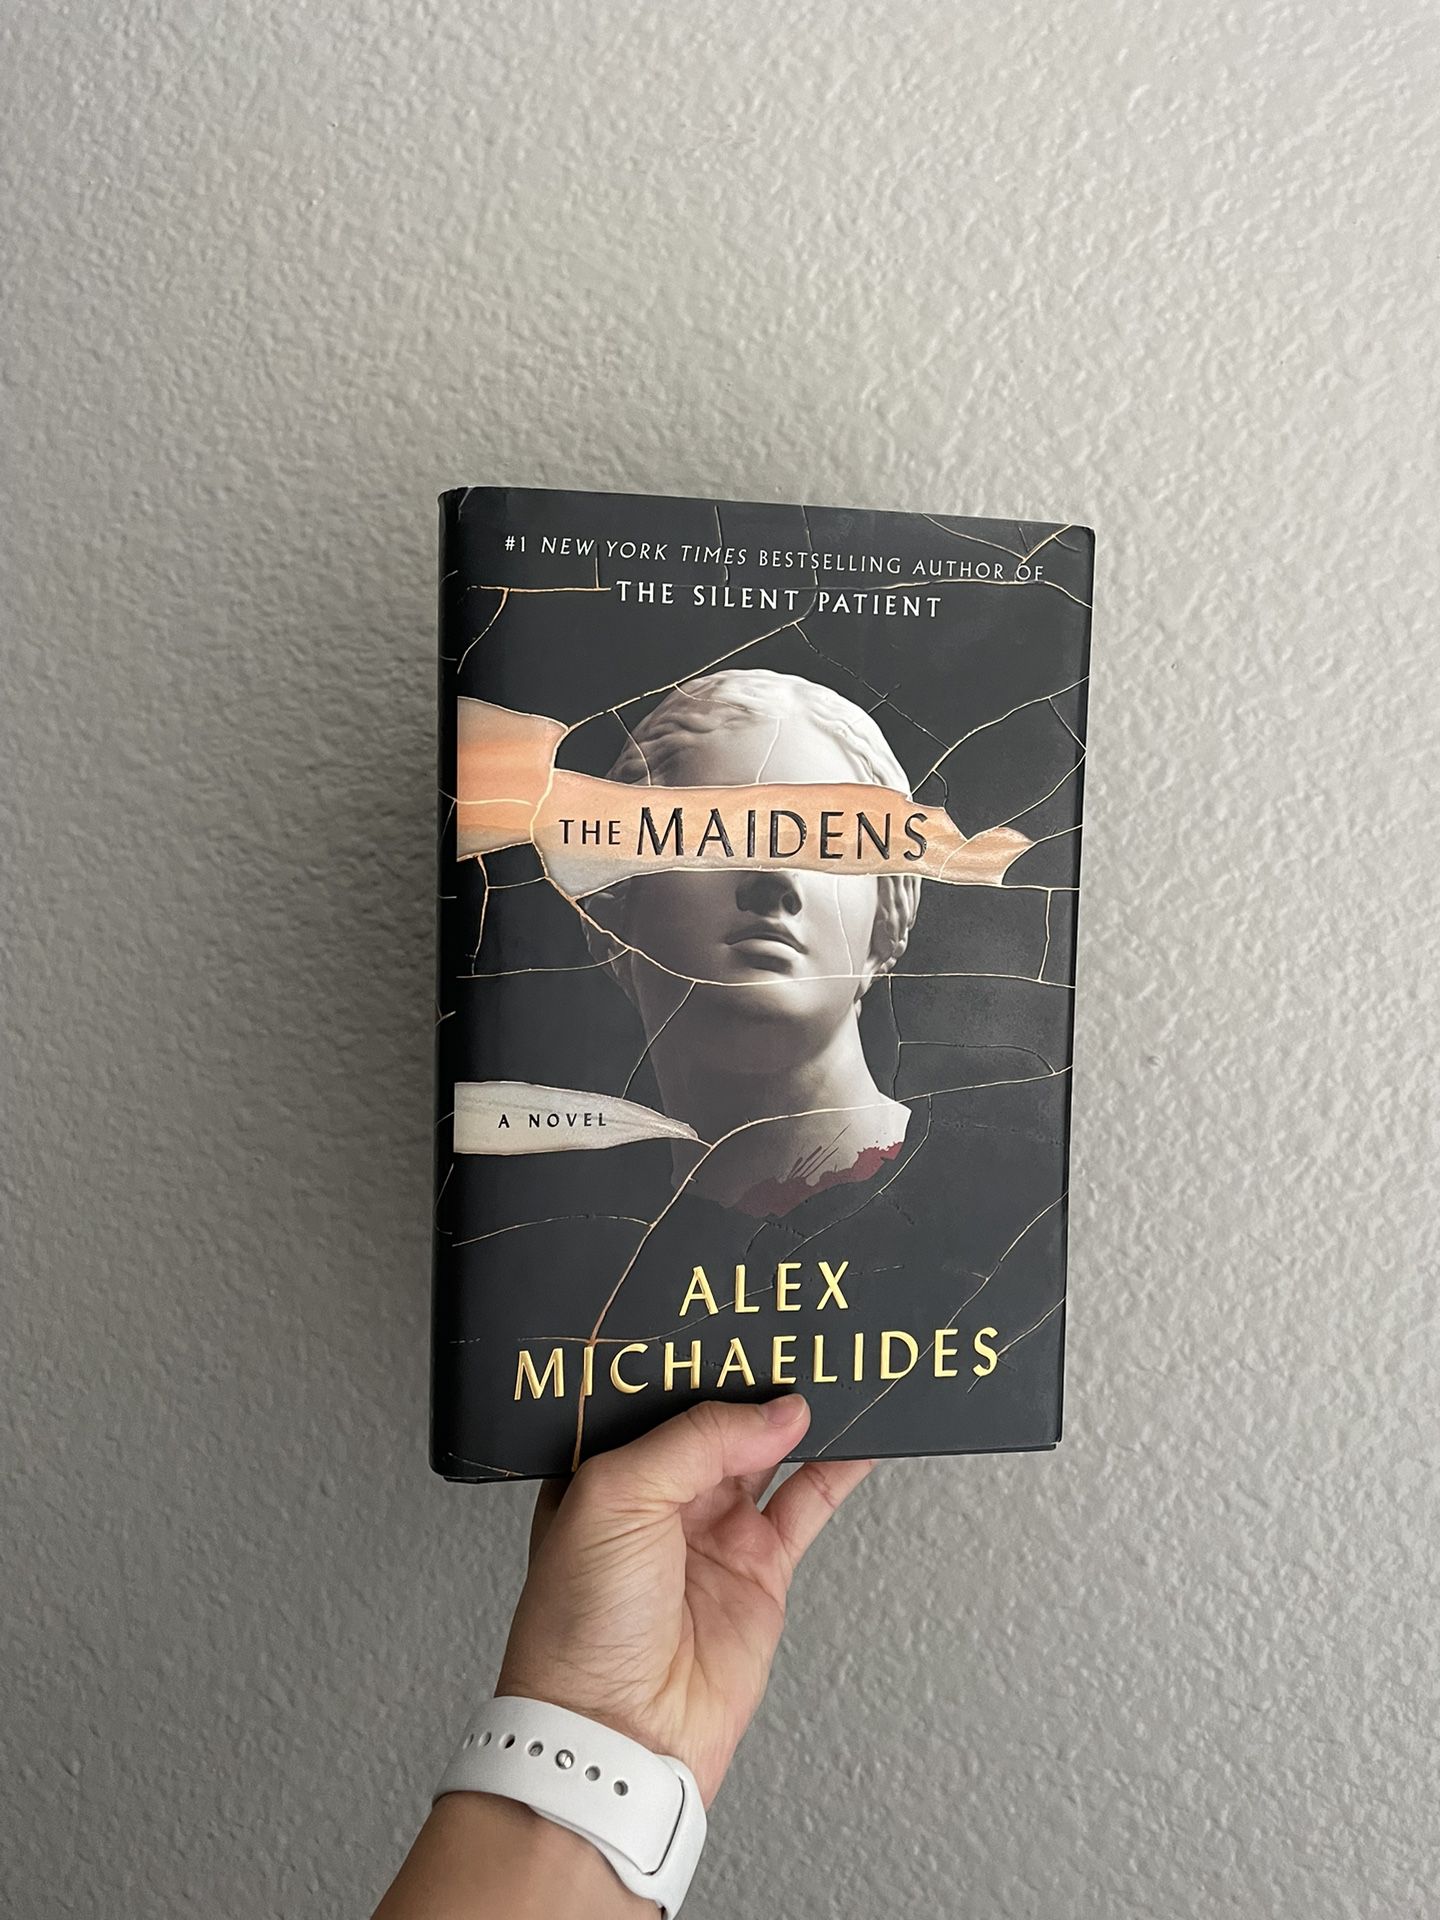 BOOK: “The Maidens” by Alex Michaelides